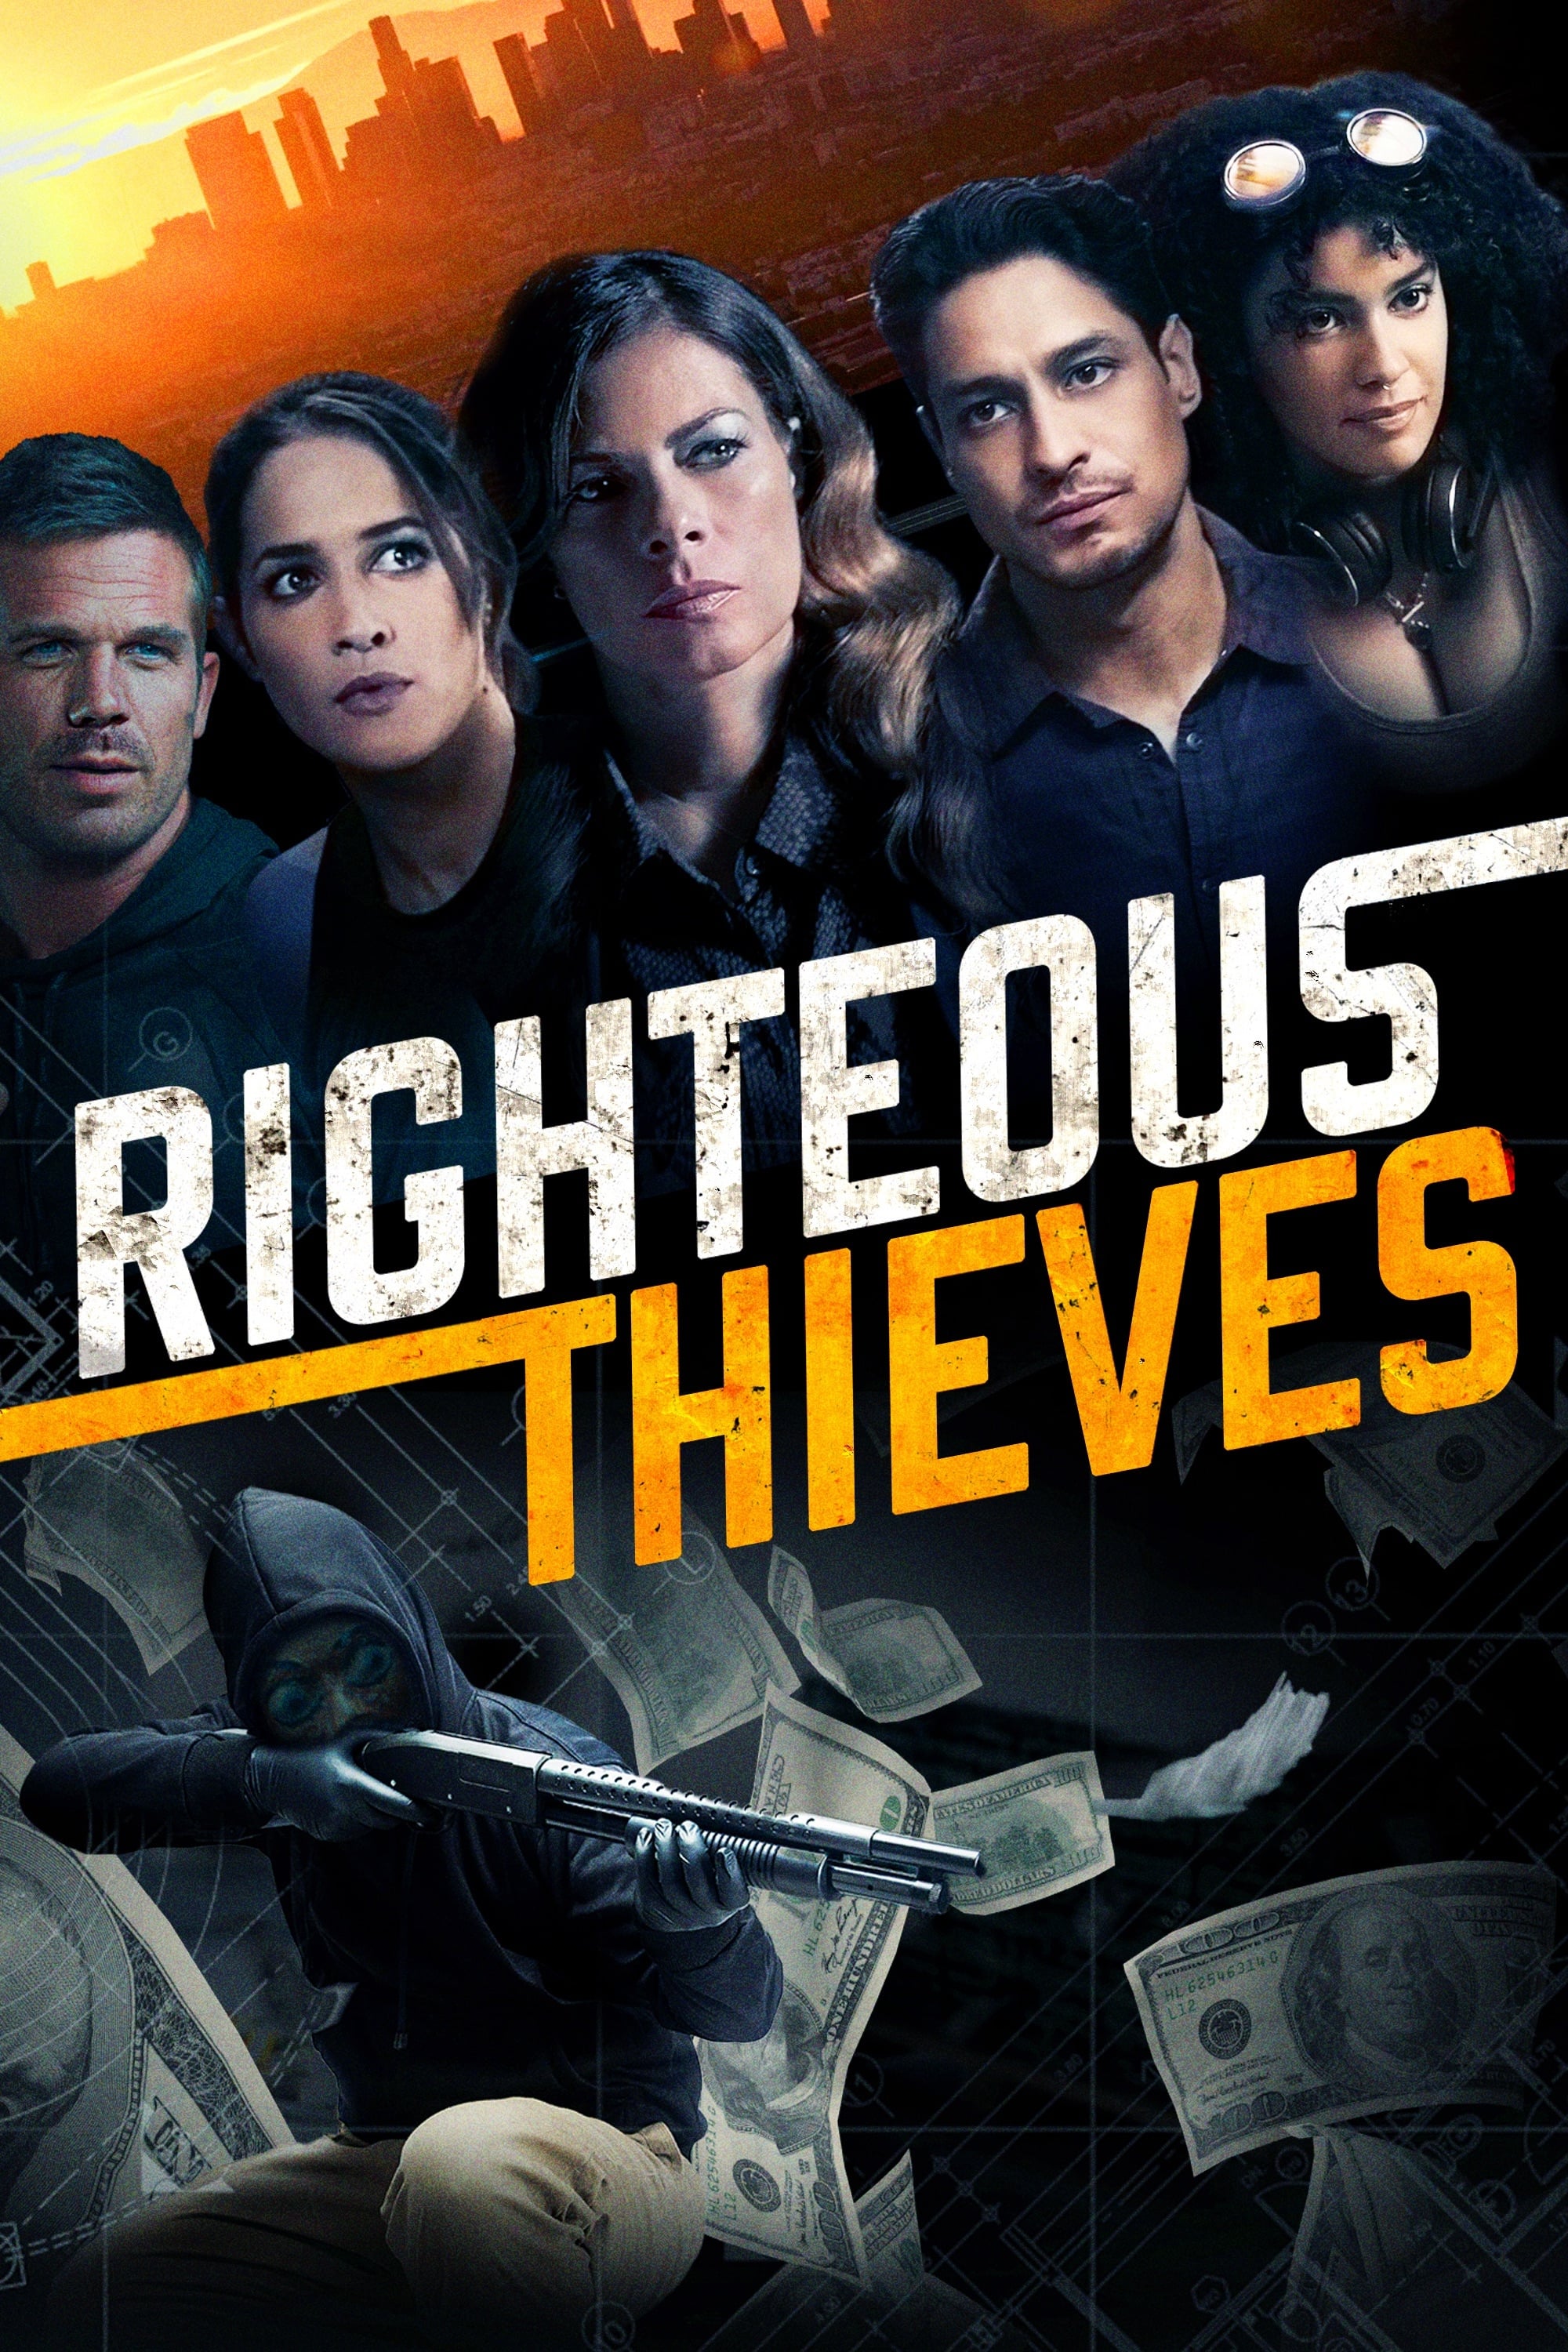 Righteous Thieves